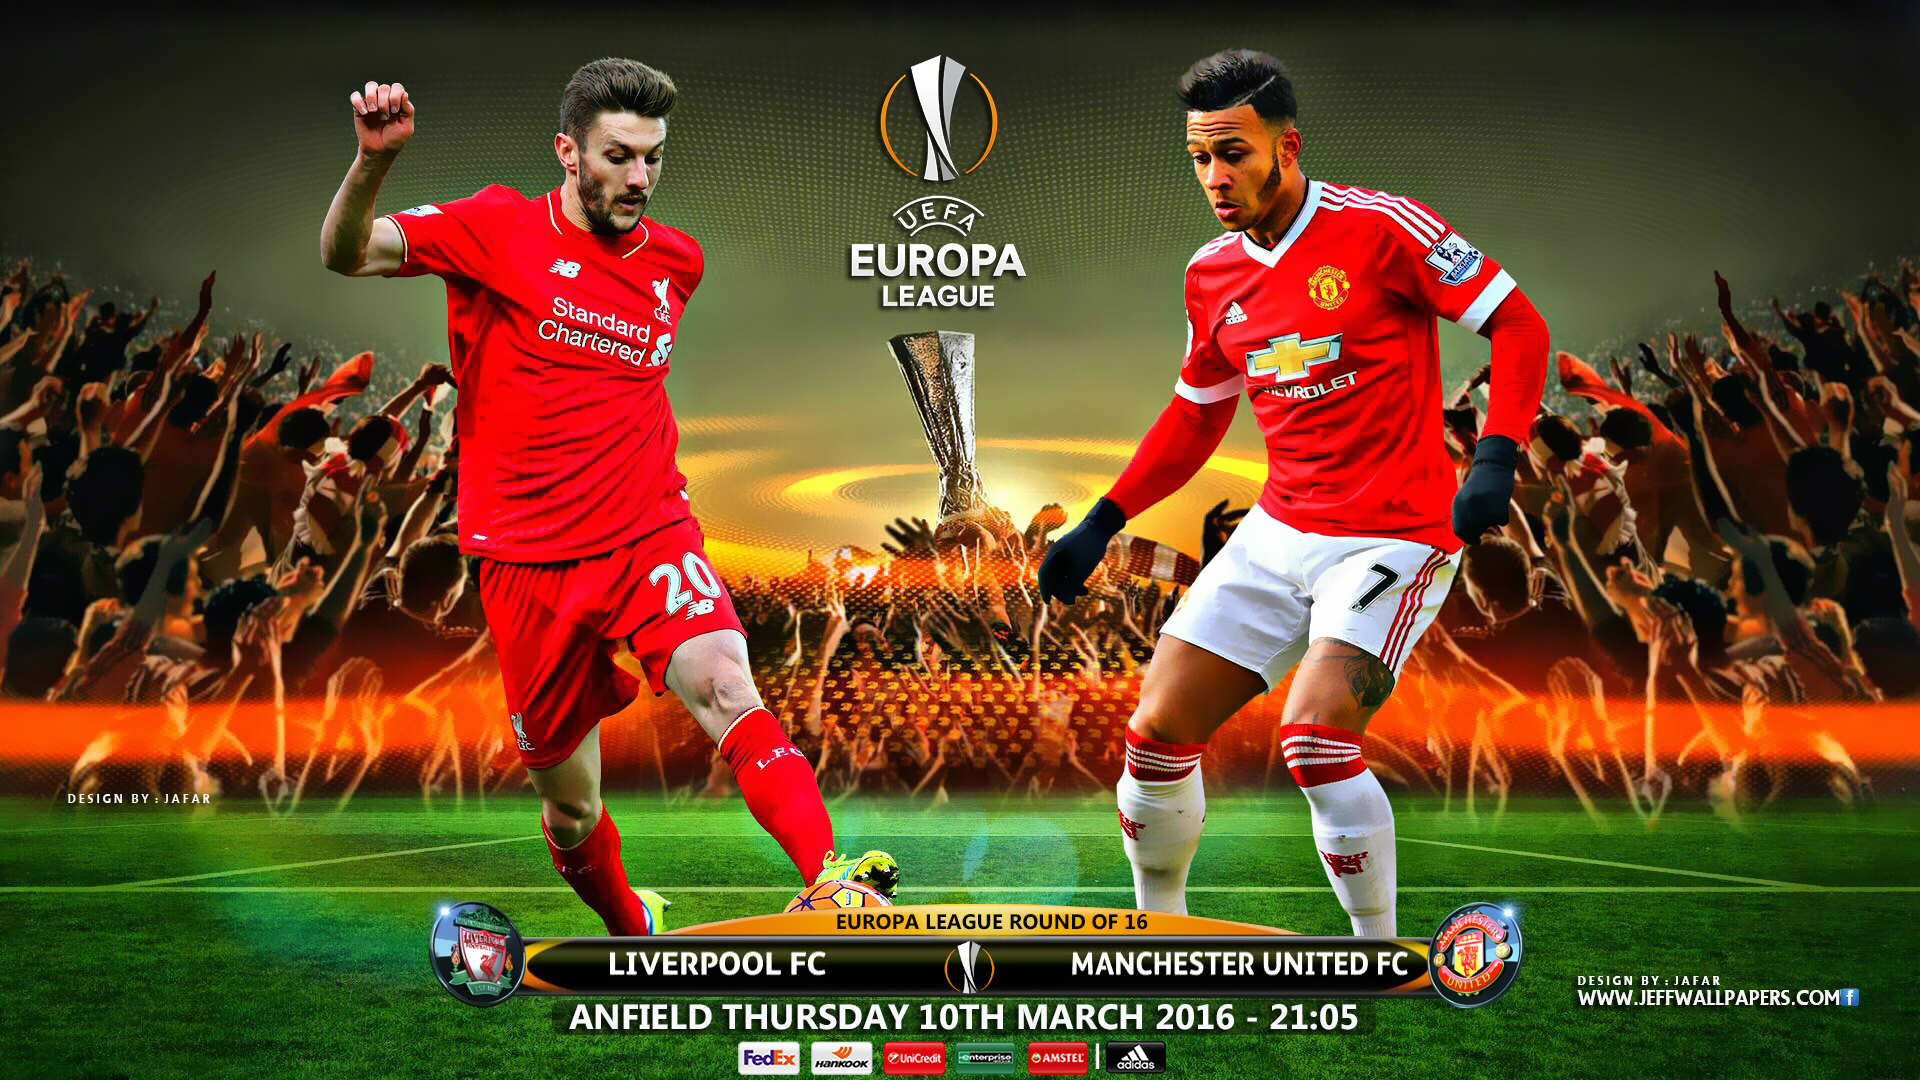 LIVERPOOL MANCHESTER UNITED EUROPA LEAGUE 2016